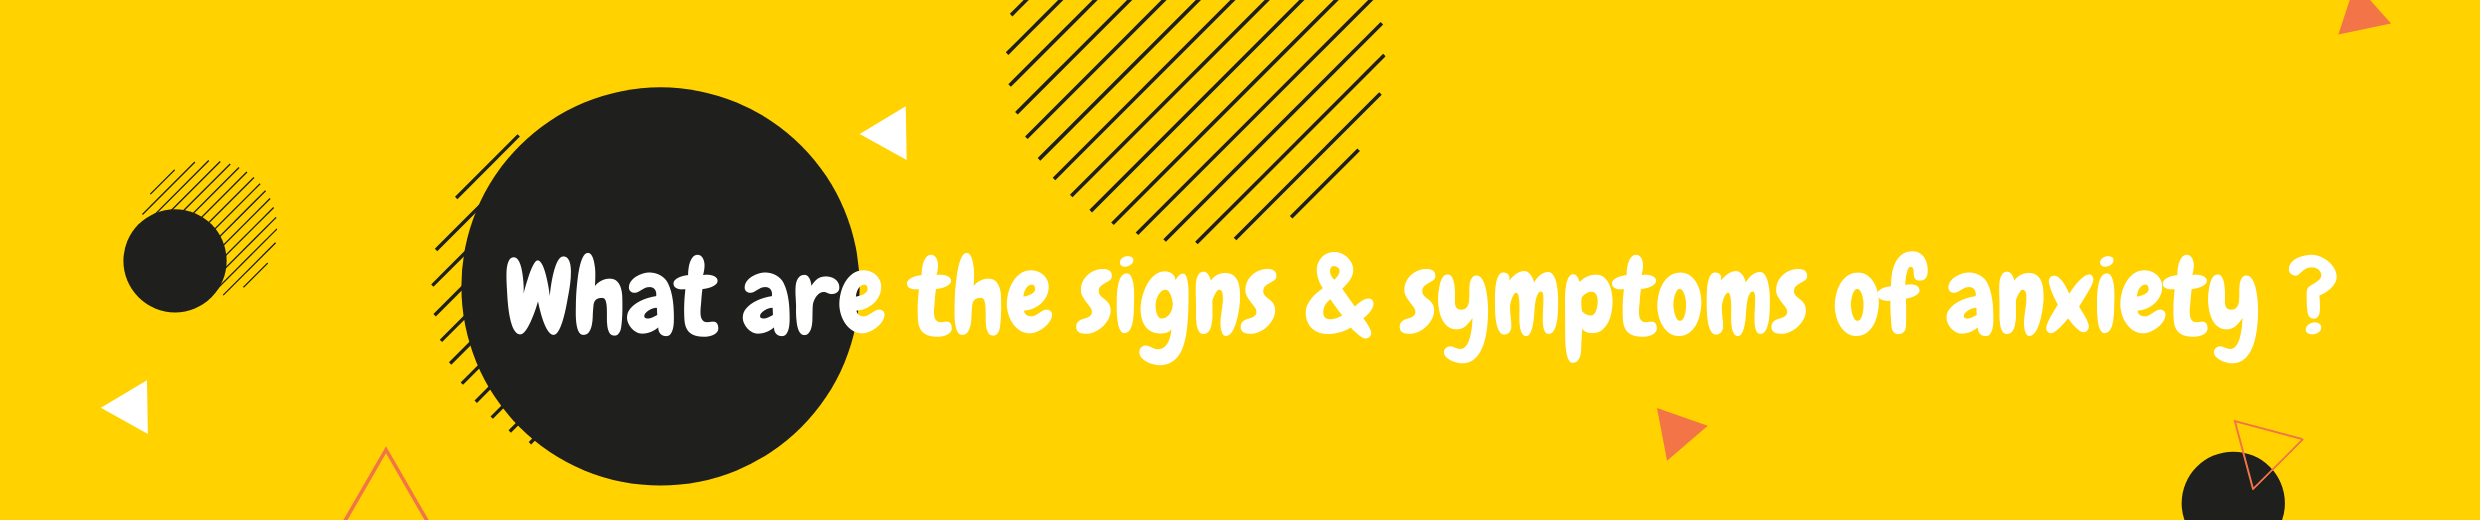 what are the signs and symptoms of anxiety? banner